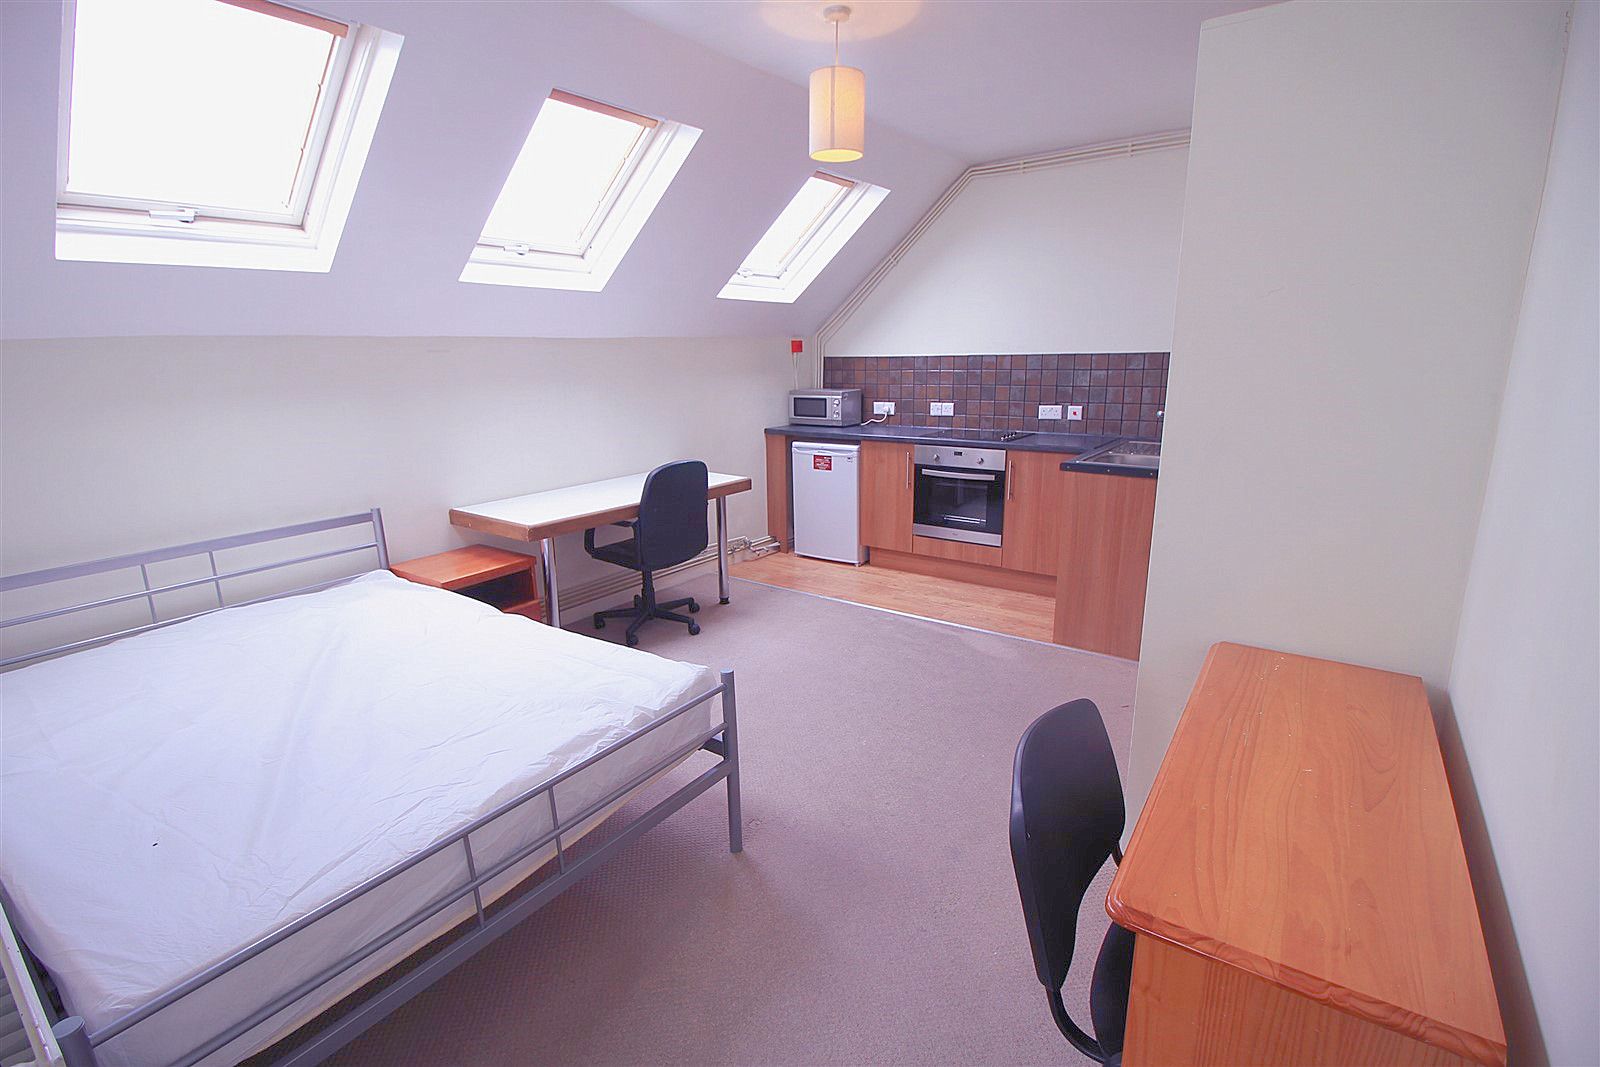 Kingfisher Halls Loughborough - Student accommodation with double ensuite with kitchen